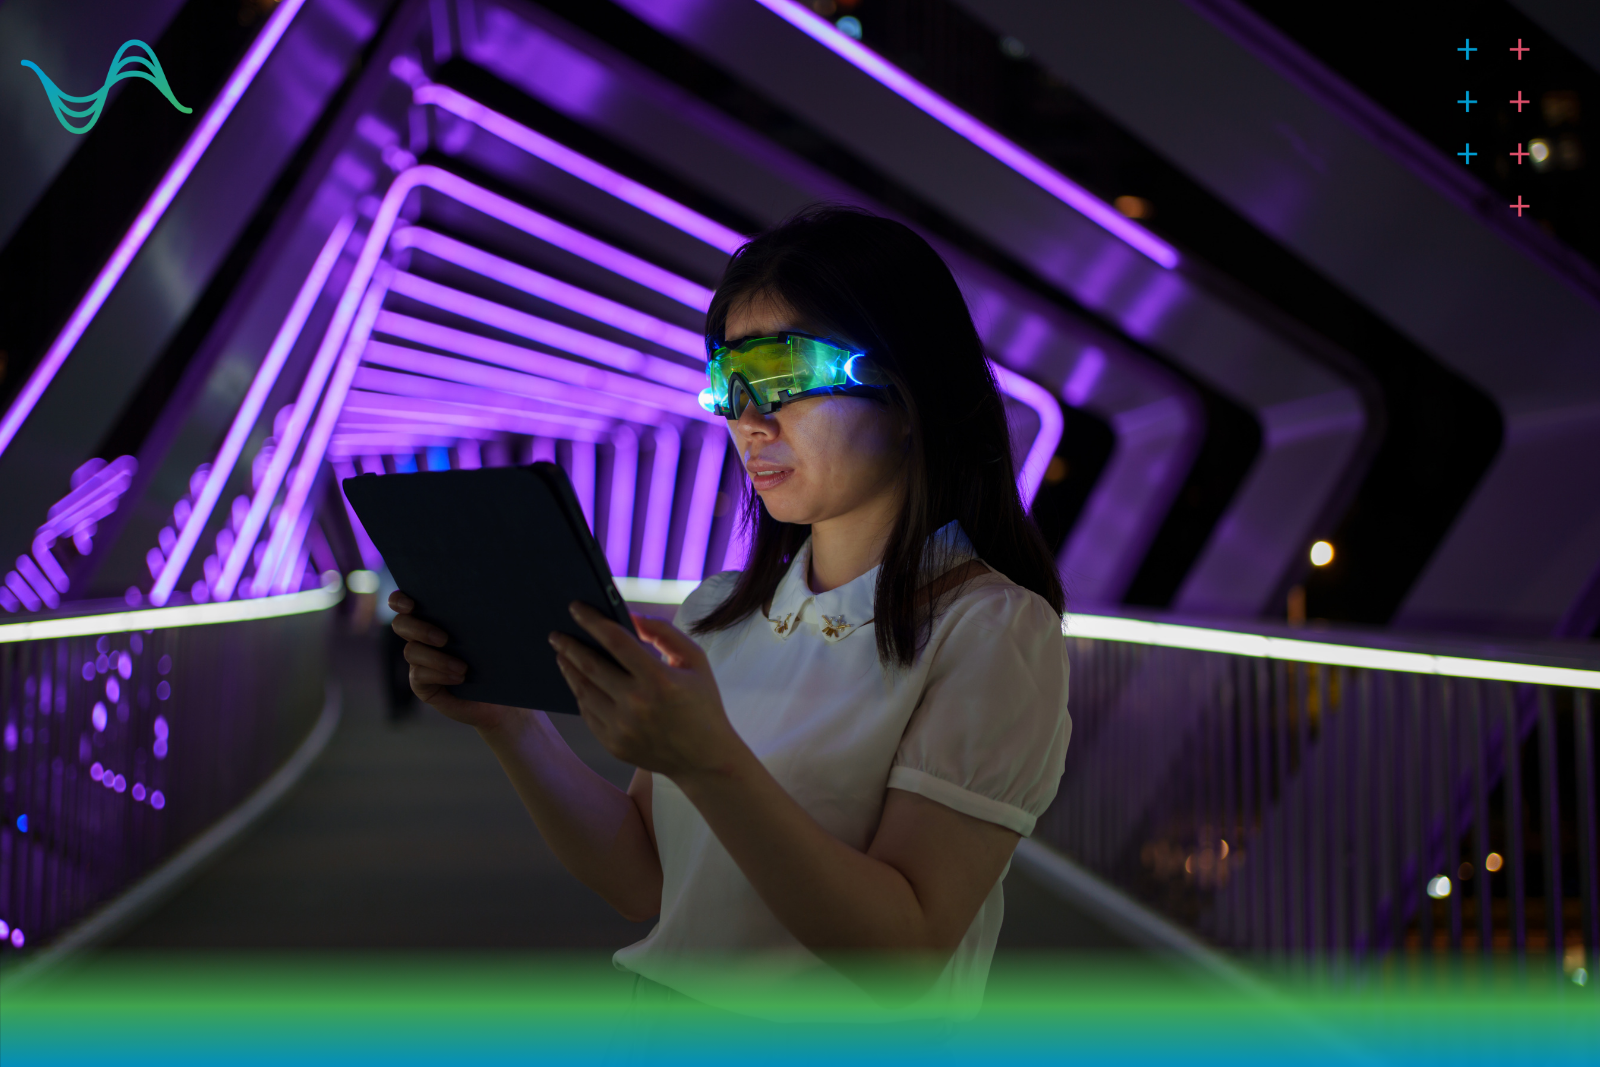 Picture of a young woman wearing a green viser looking at a digital tablet on a dark walkway with purple tube lights in the background.